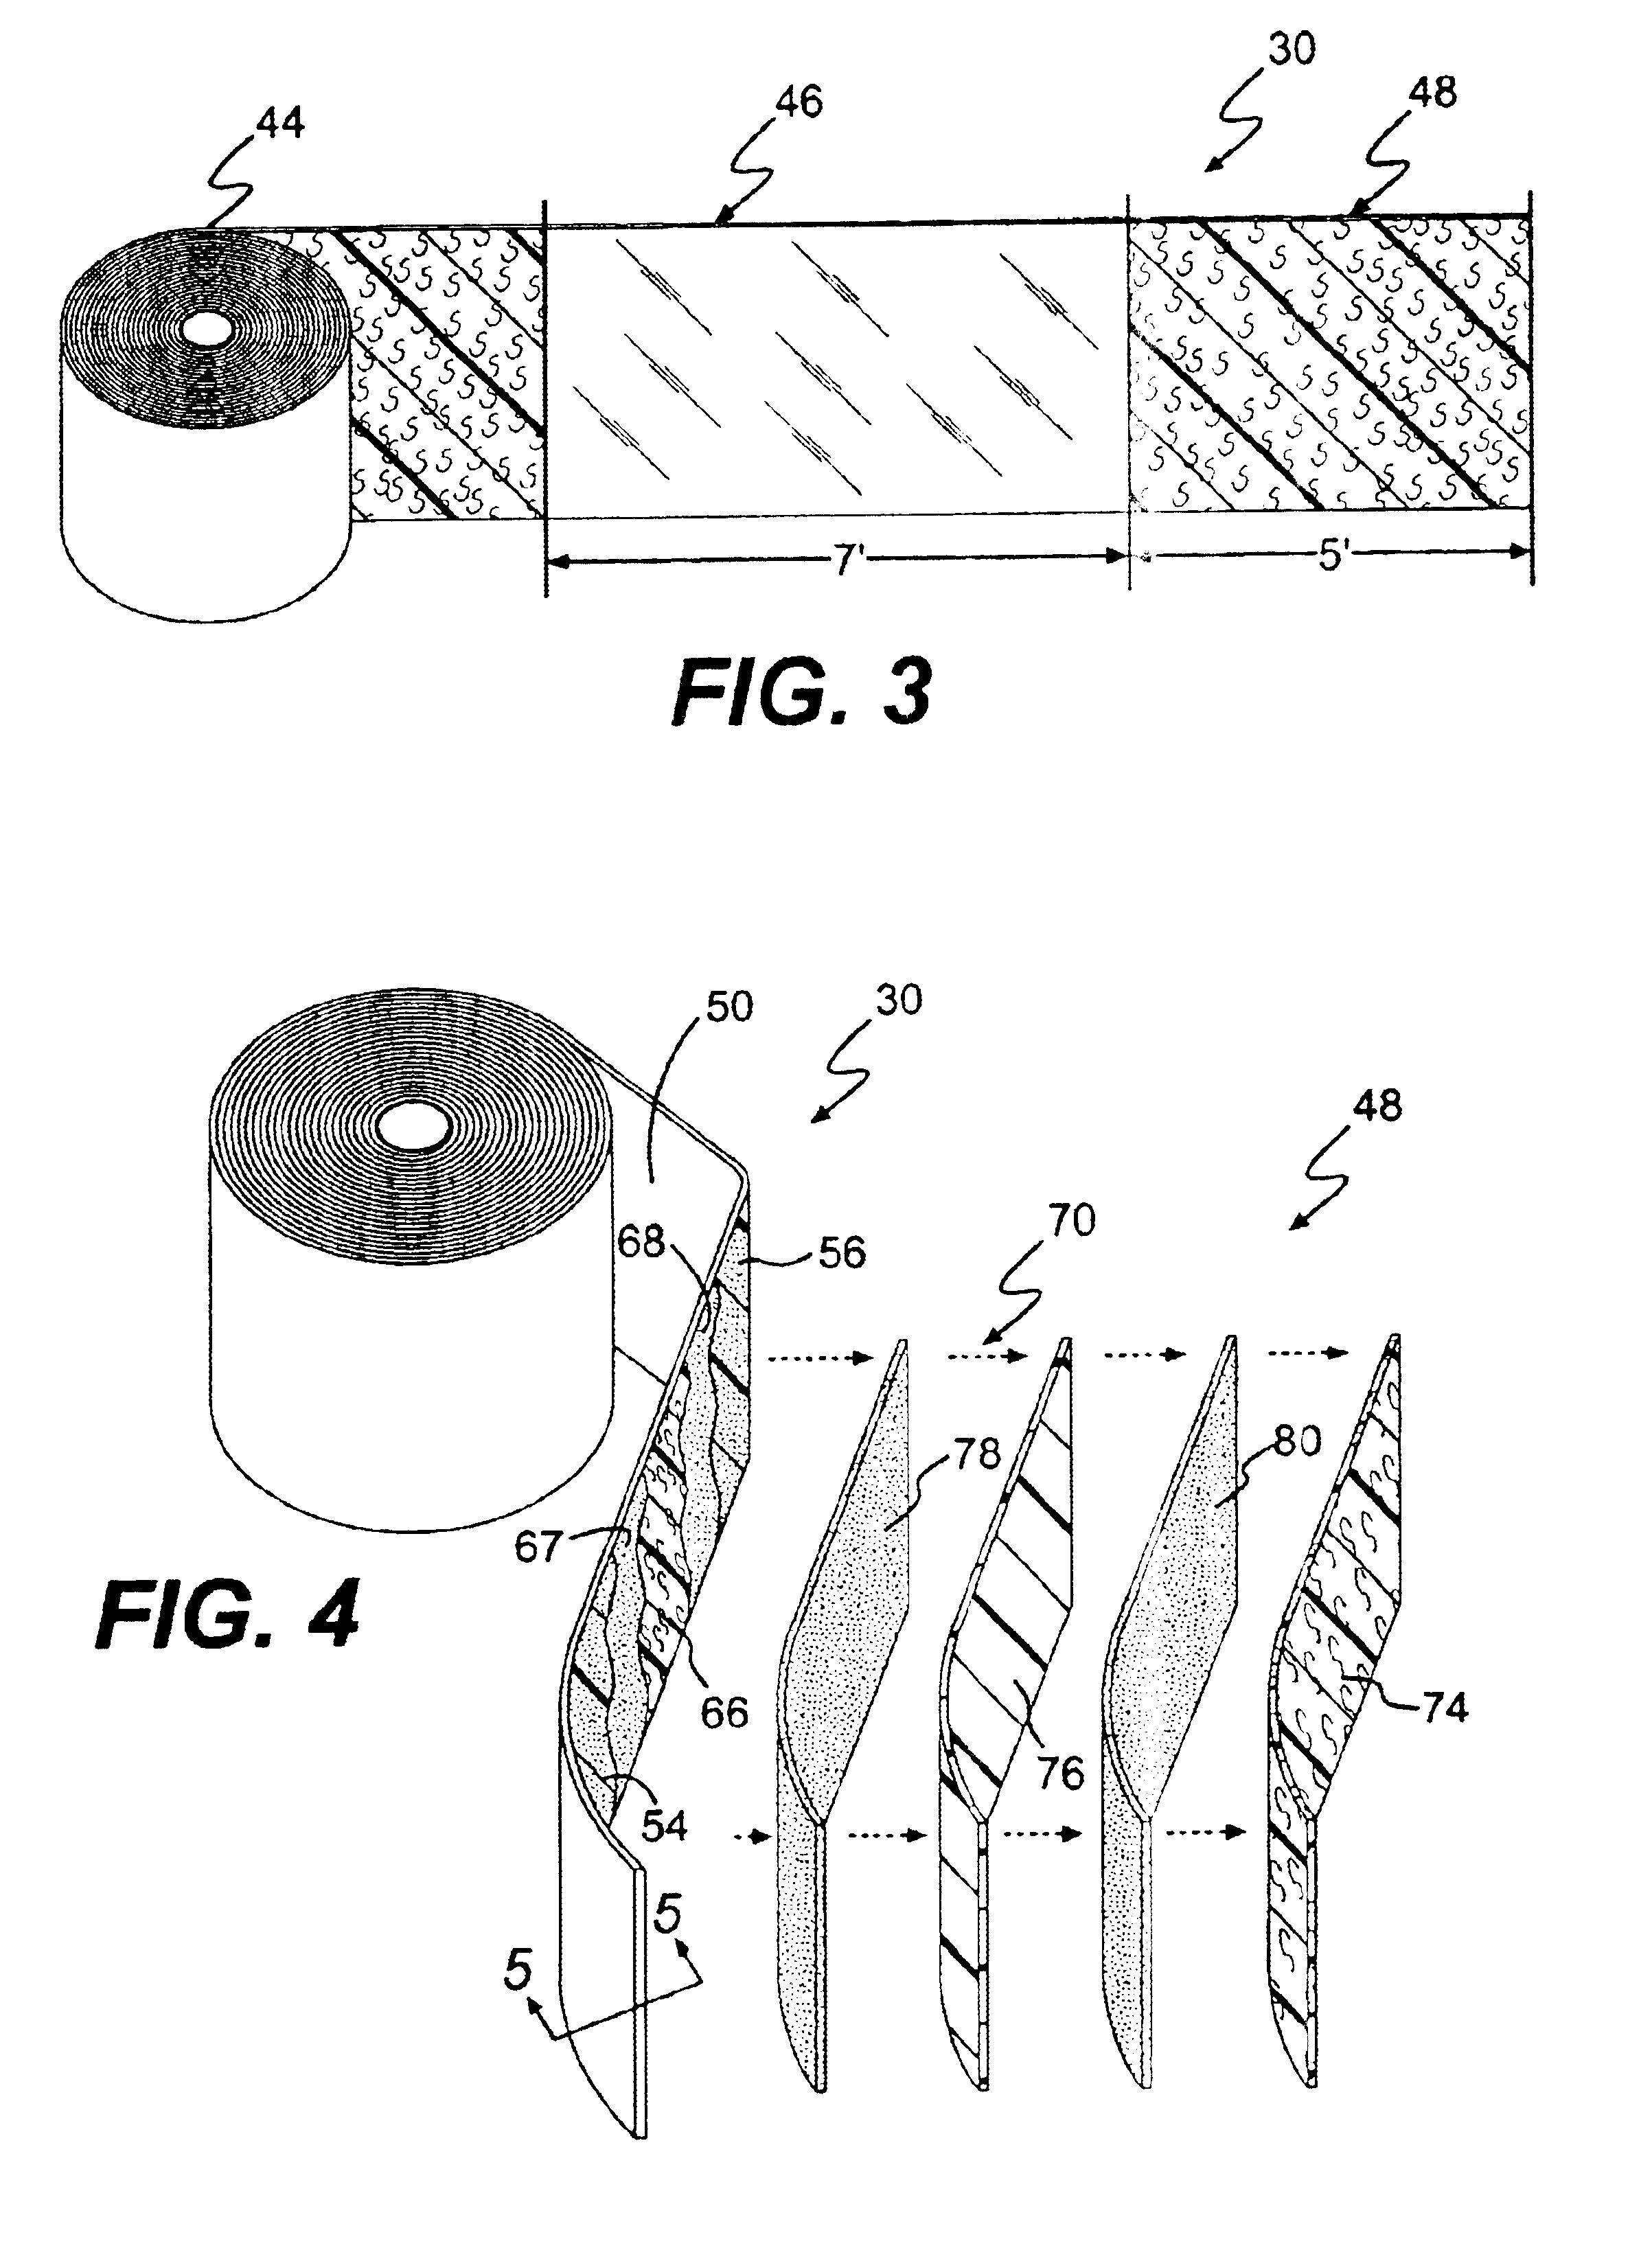 Monolithic cargo restraint system and method